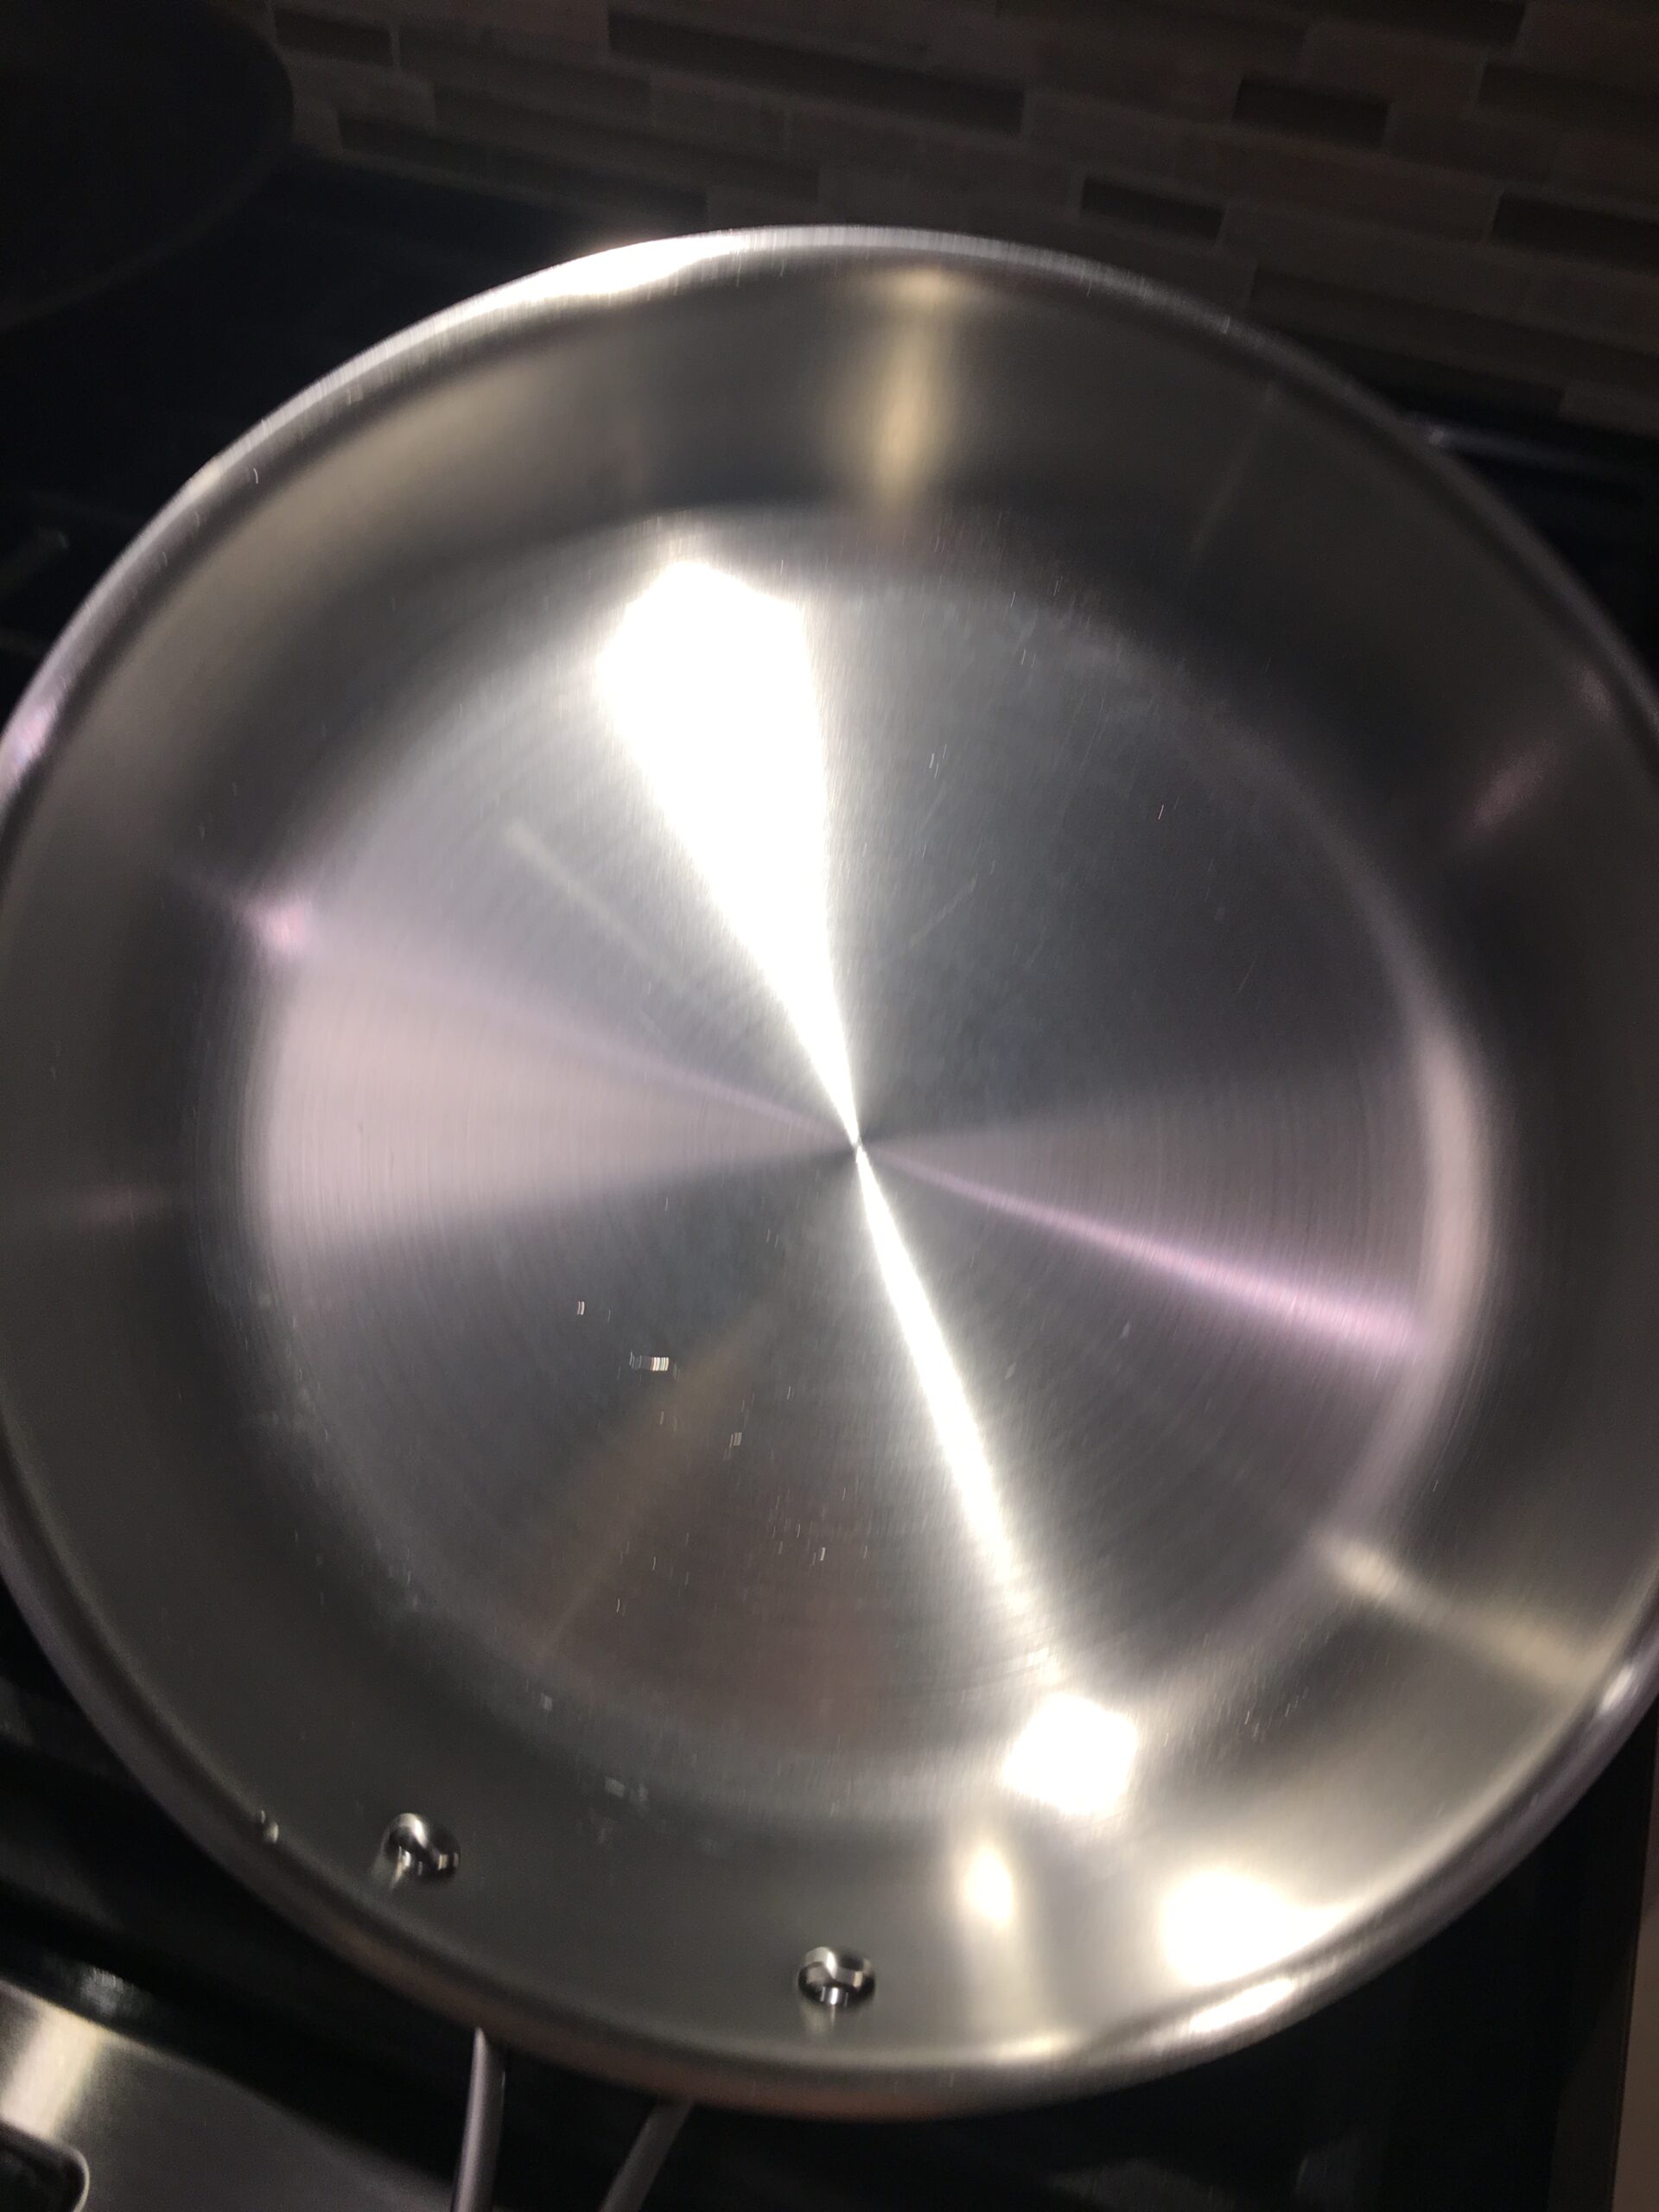 no more white spots on SS pans